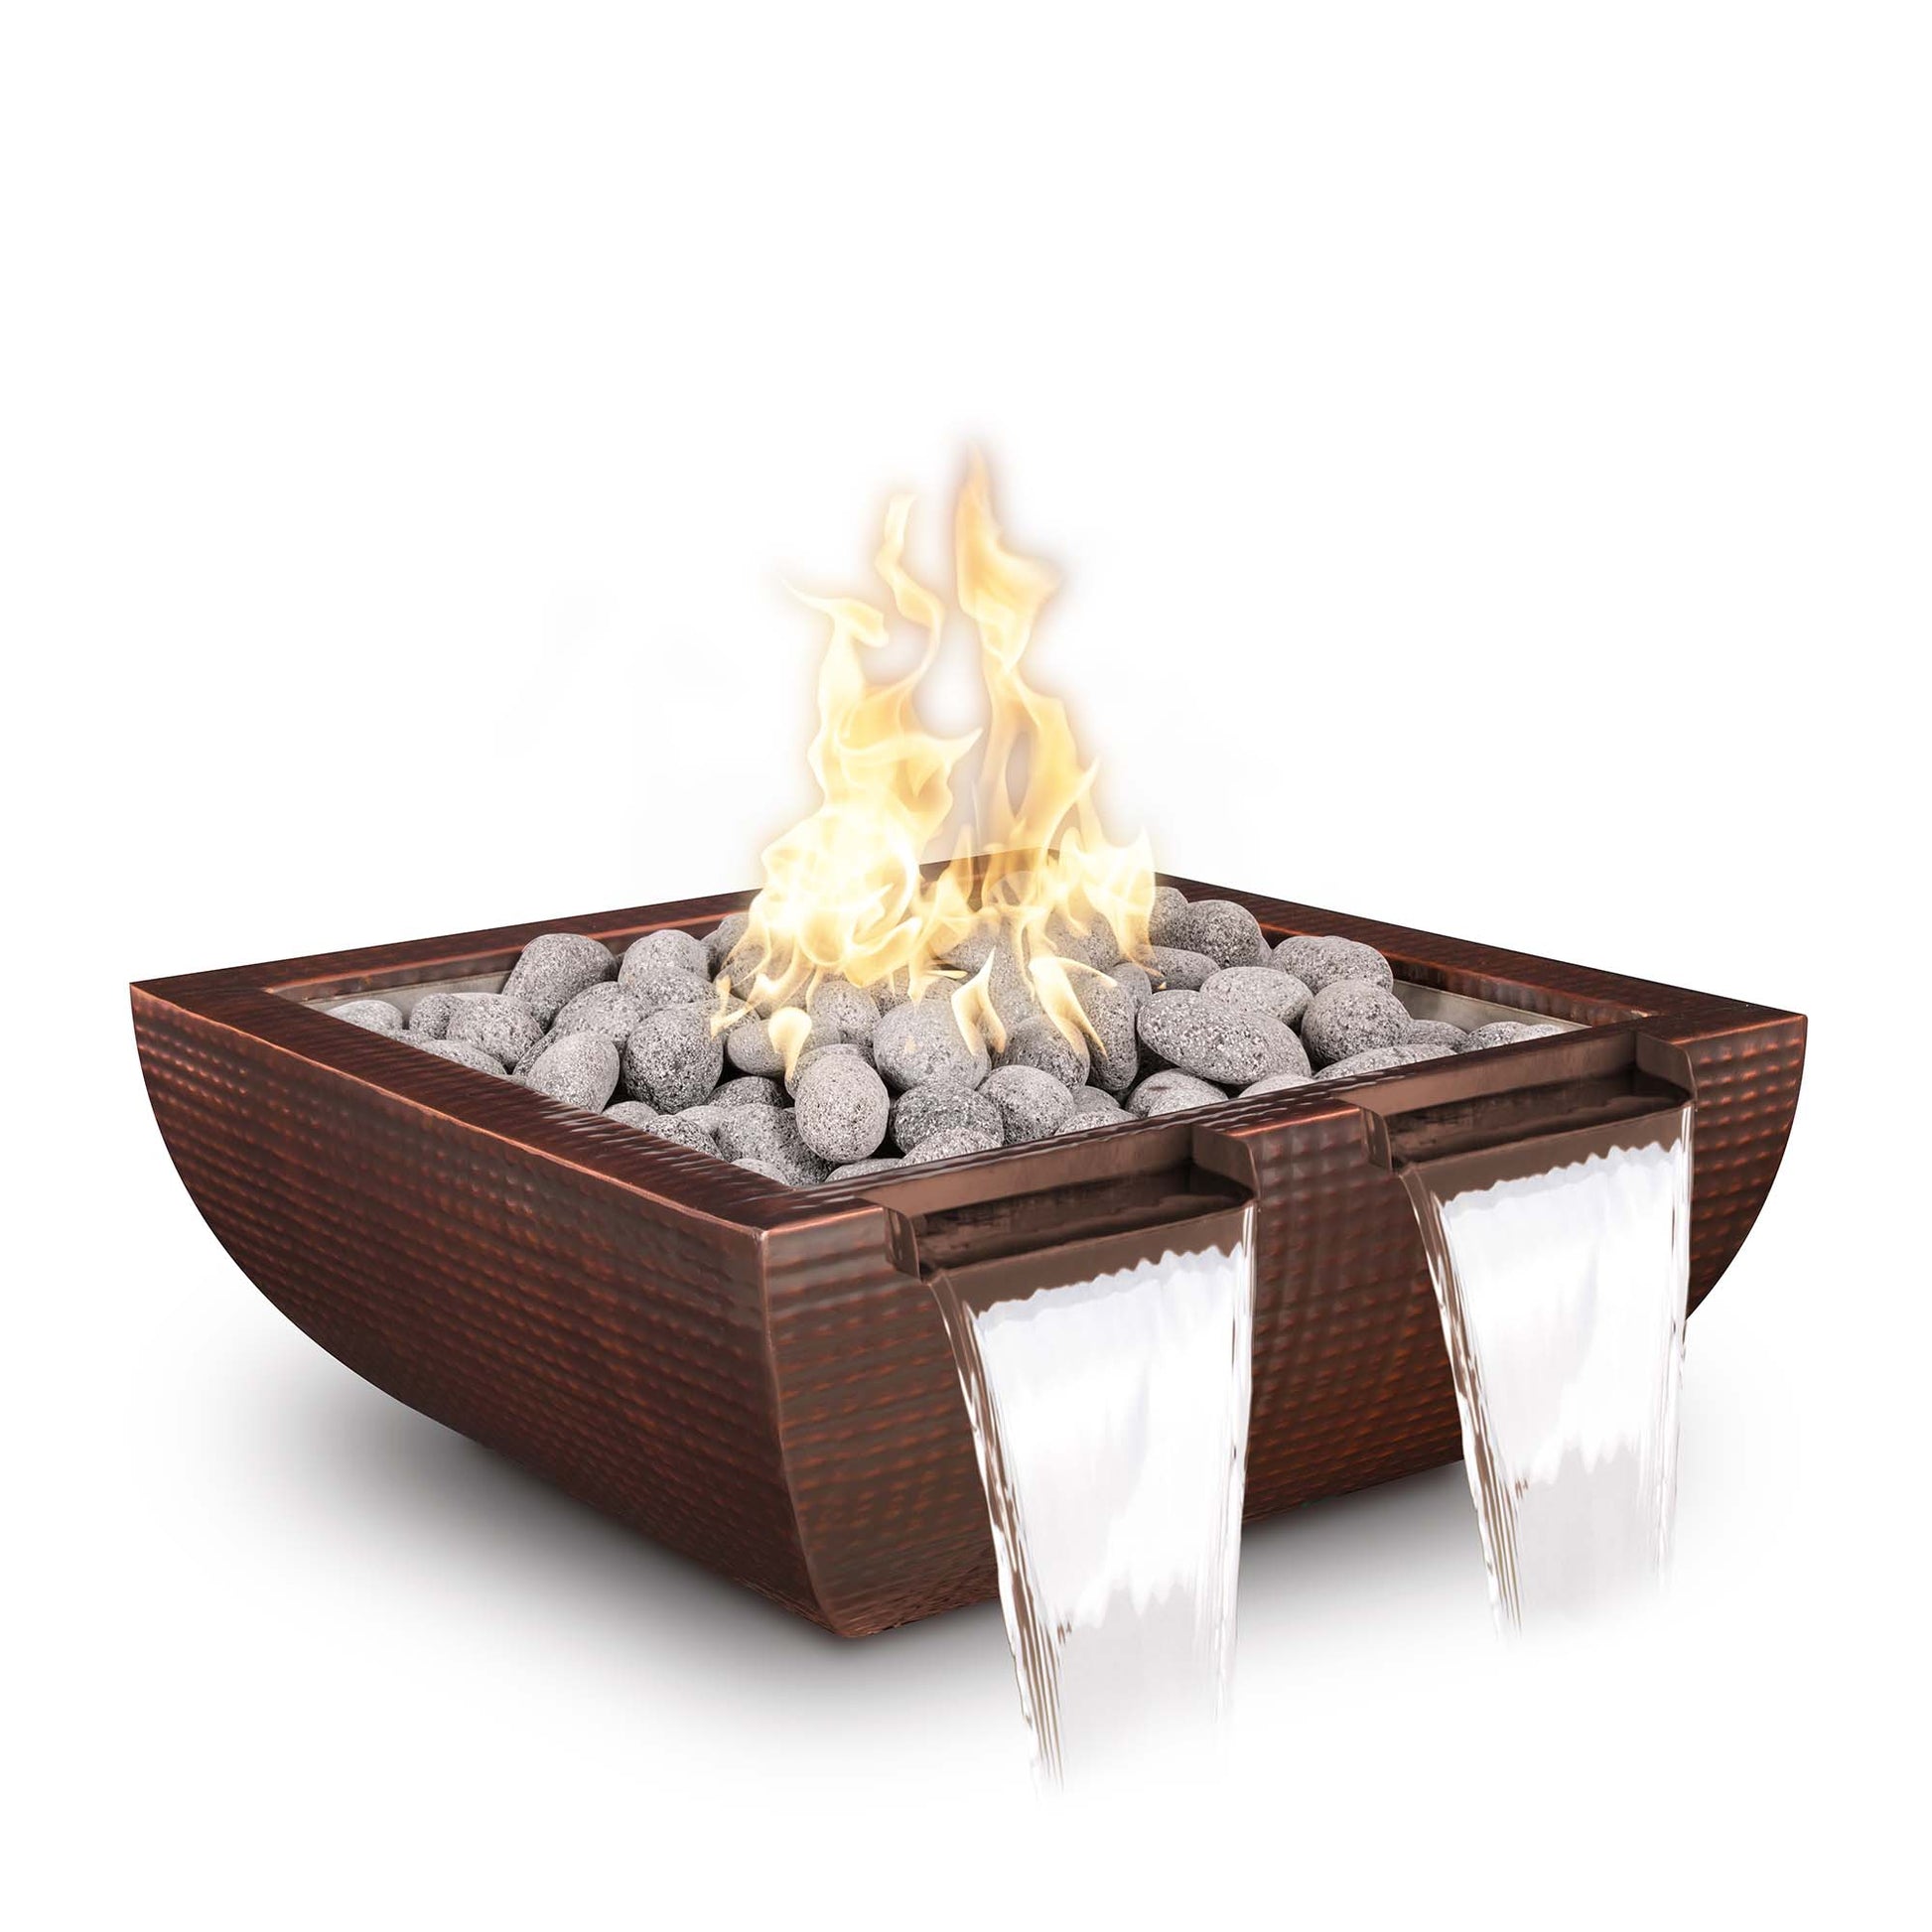 The Outdoor Plus Avalon Twin Spill 30" Black Powder Coated Metal Liquid Propane Fire & Water Bowl with Match Lit with Flame Sense Ignition